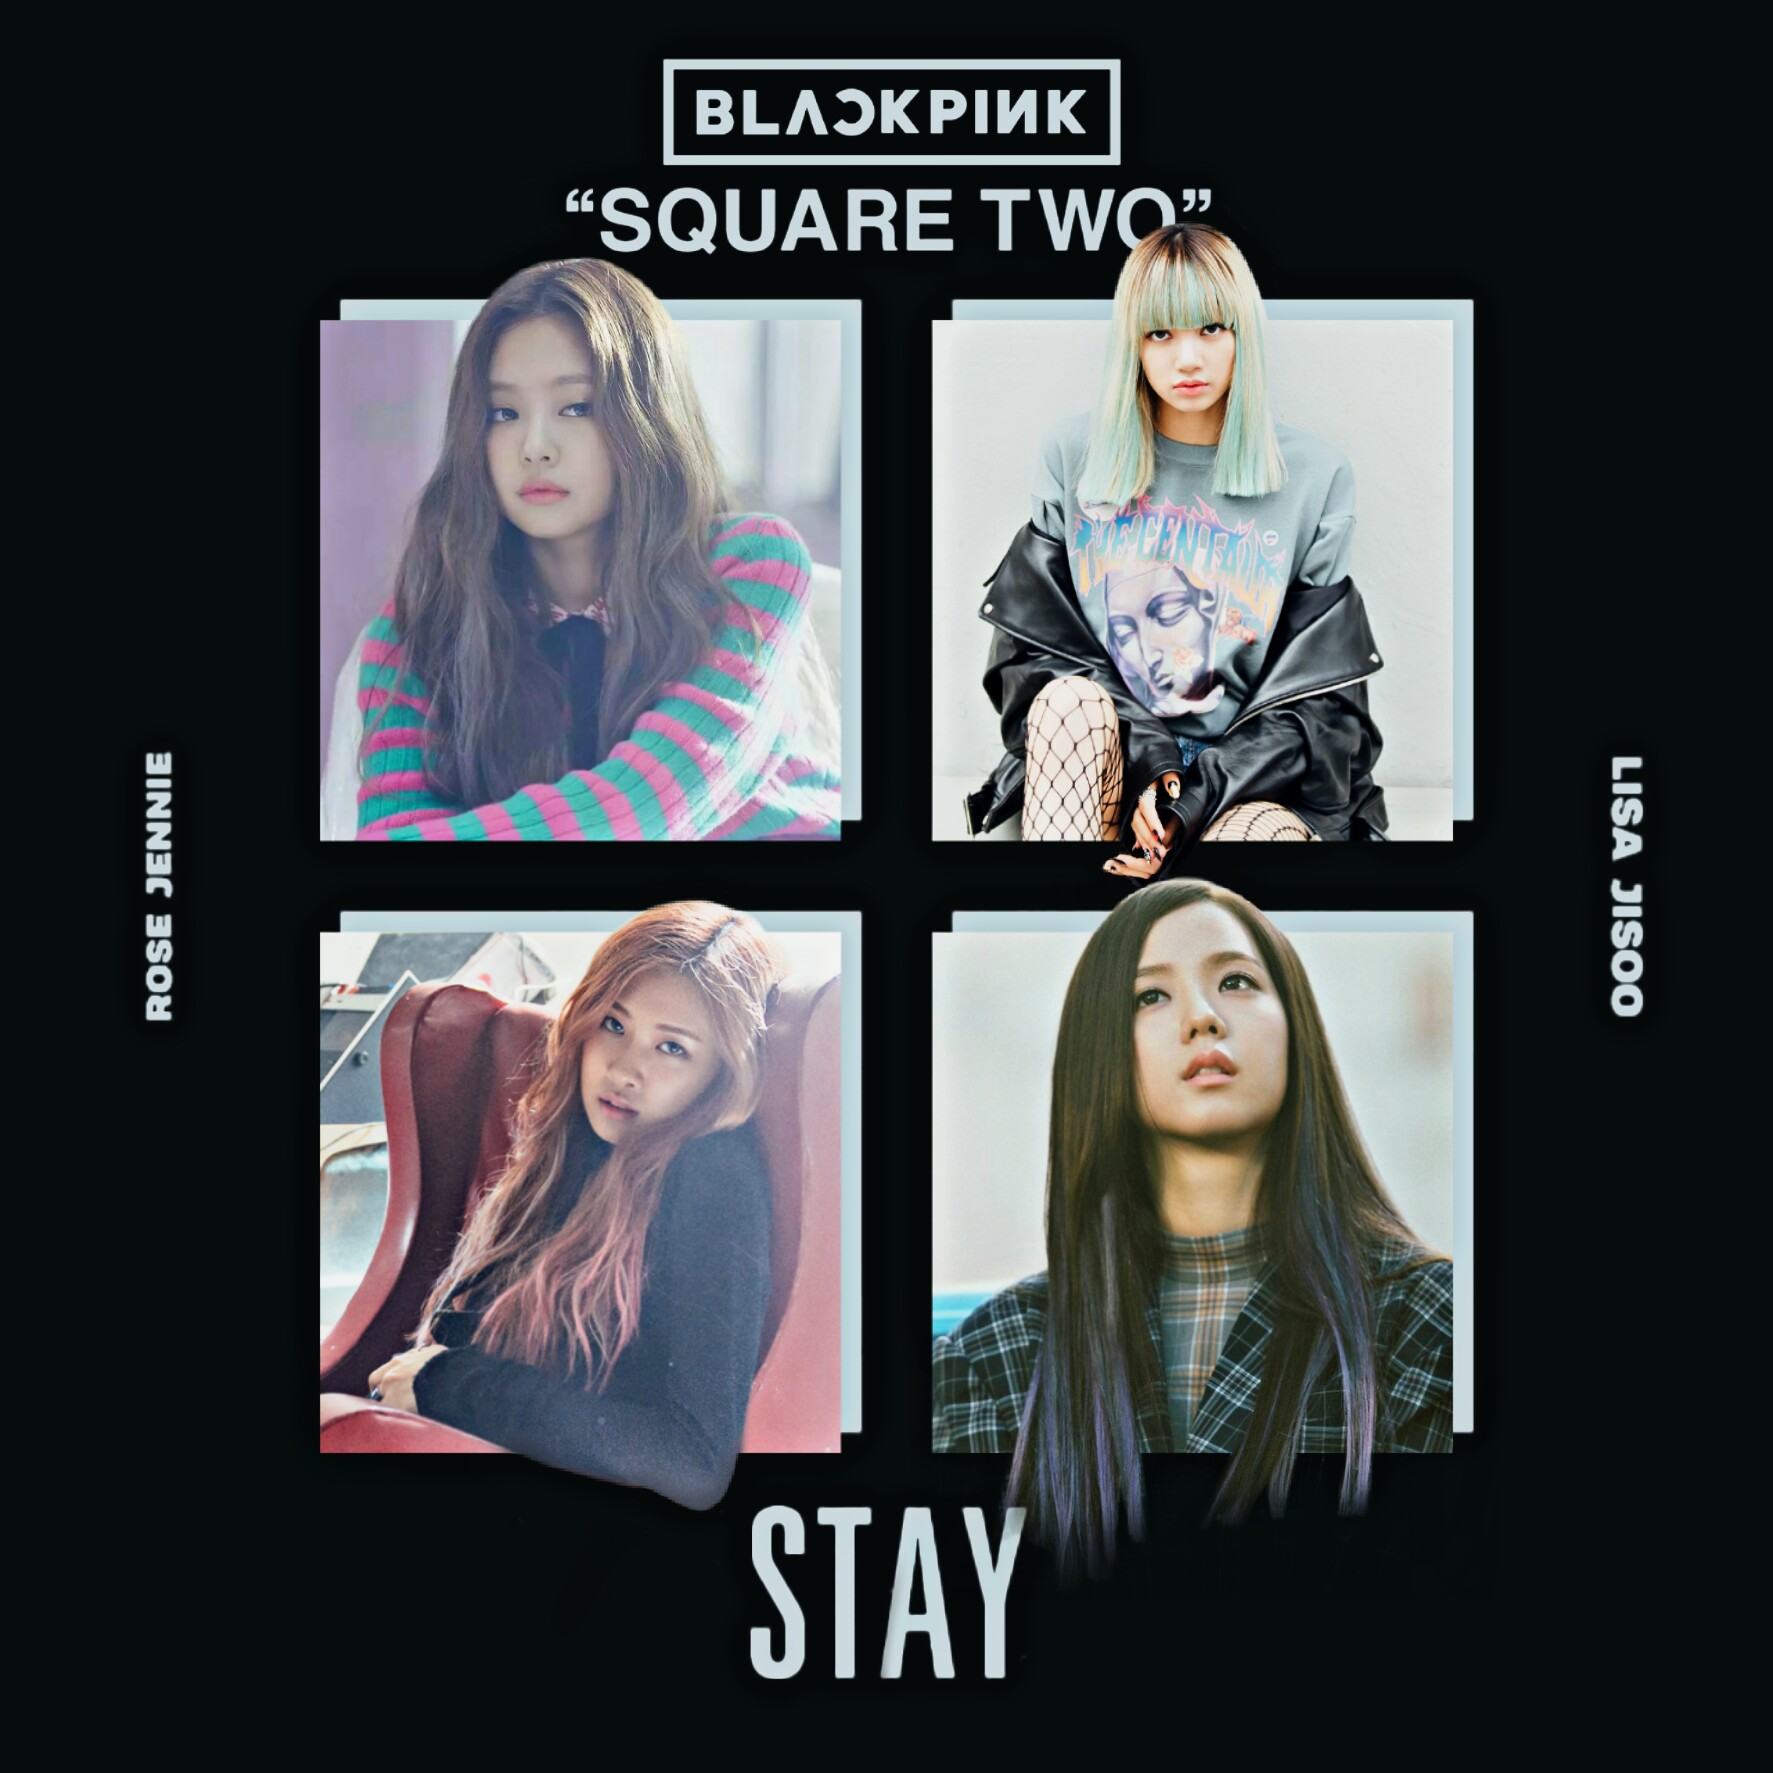 BLACKPINK STAY / SQUARE TWO album cover by LEAlbum on DeviantArt